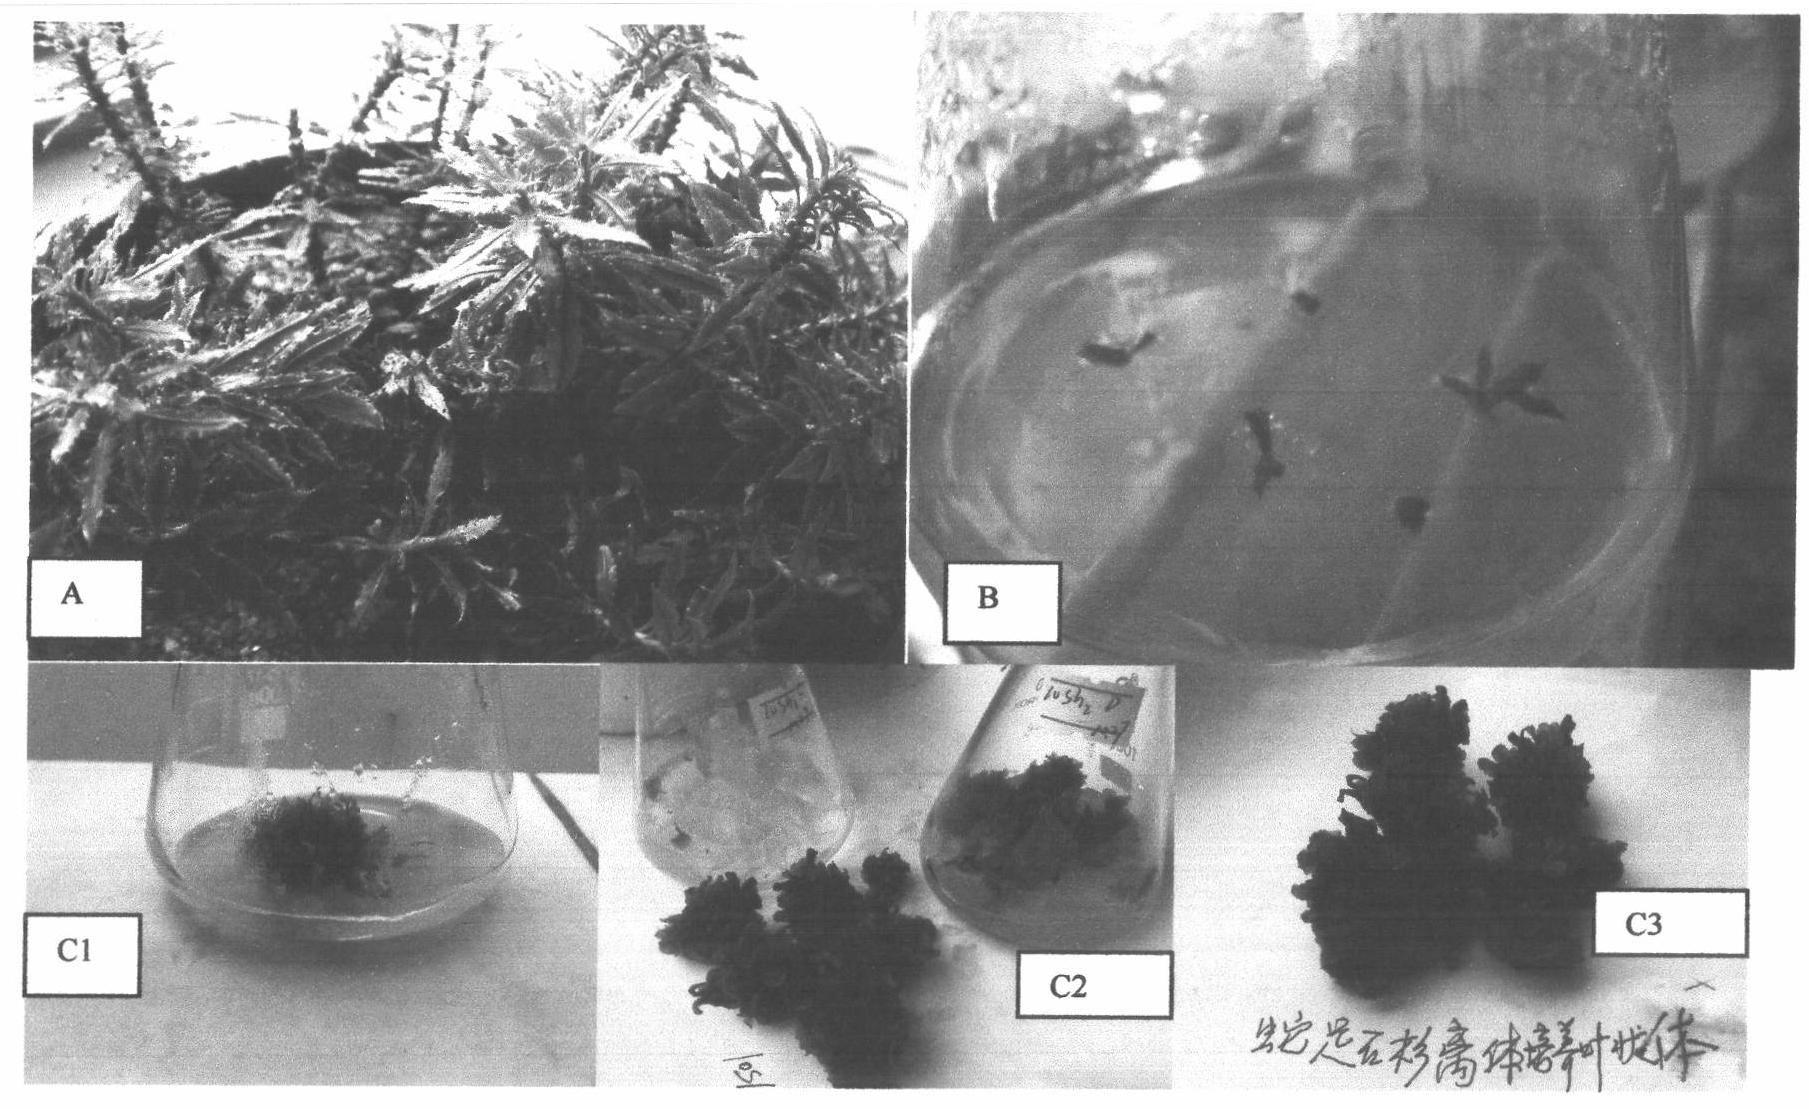 Cultivation method for producing hupenine A through in vitro induction proliferation of thallus of huperzia serrata